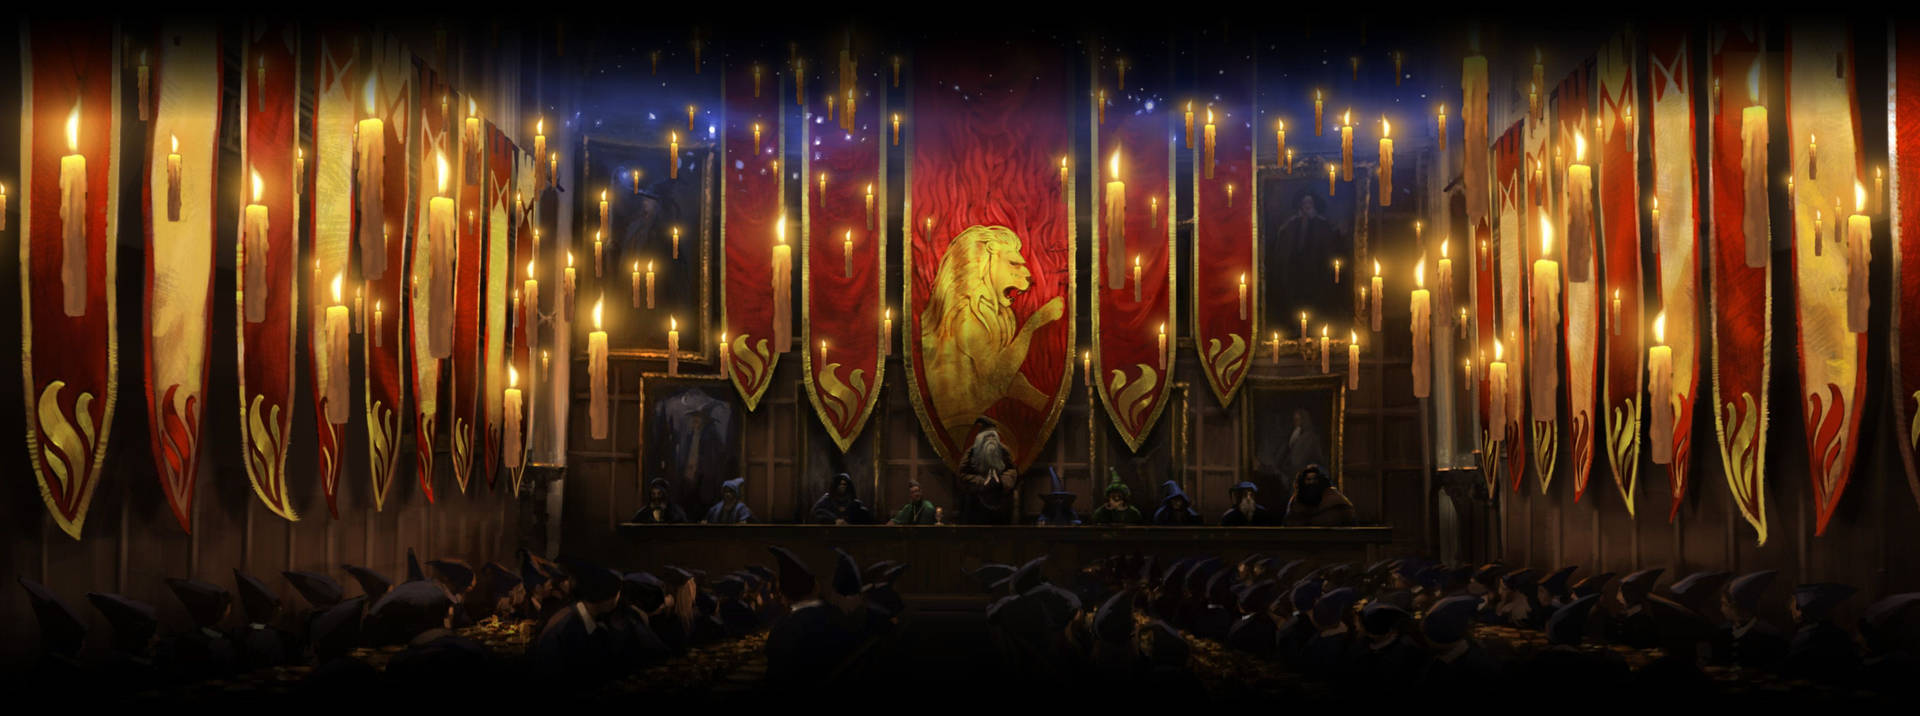 Gryffindor House Common Room Background